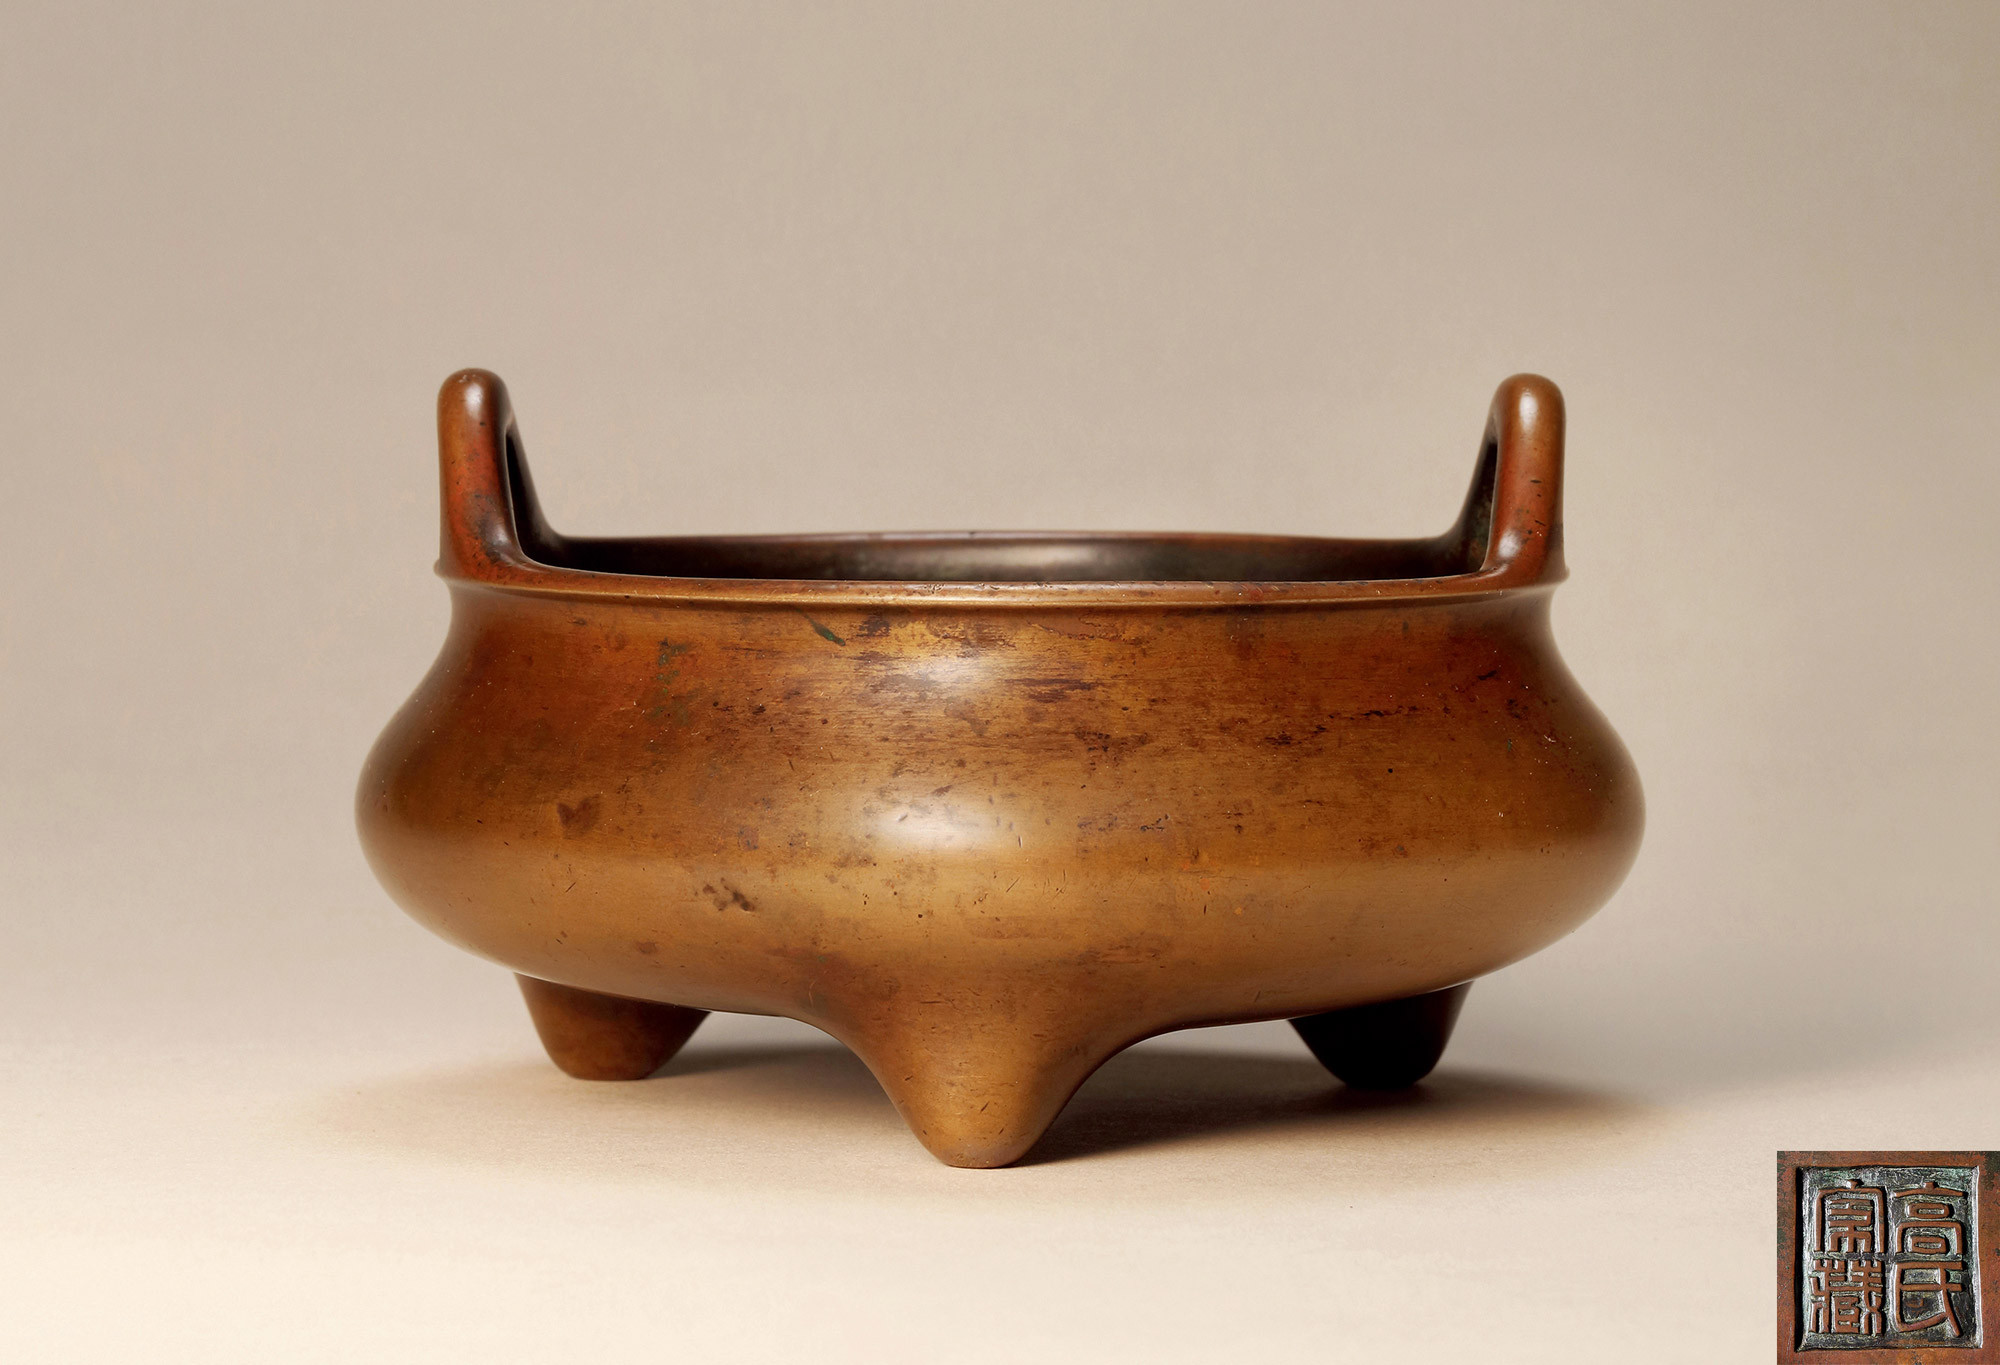 A RARE BRONZE CENSER WITH UPRIGHT LOOP HANDLES